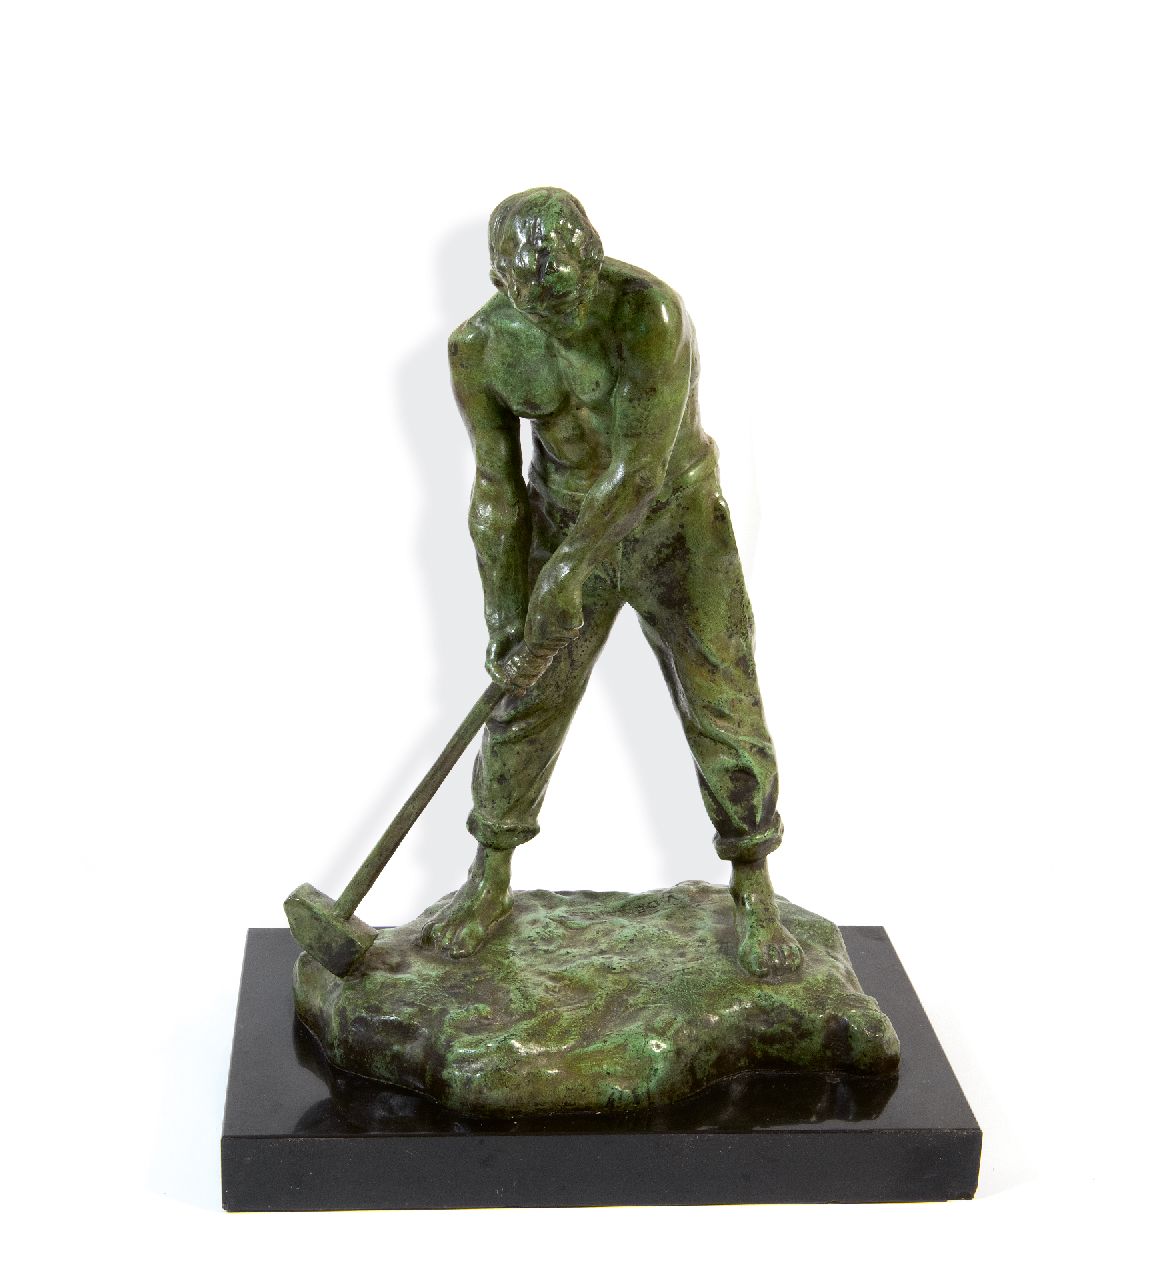 Demanet V.J.G.  | 'Victor' Joseph Ghislain Demanet | Sculptures and objects offered for sale | The stonemason, bronze 46.0 x 30.0 cm, signed on the base